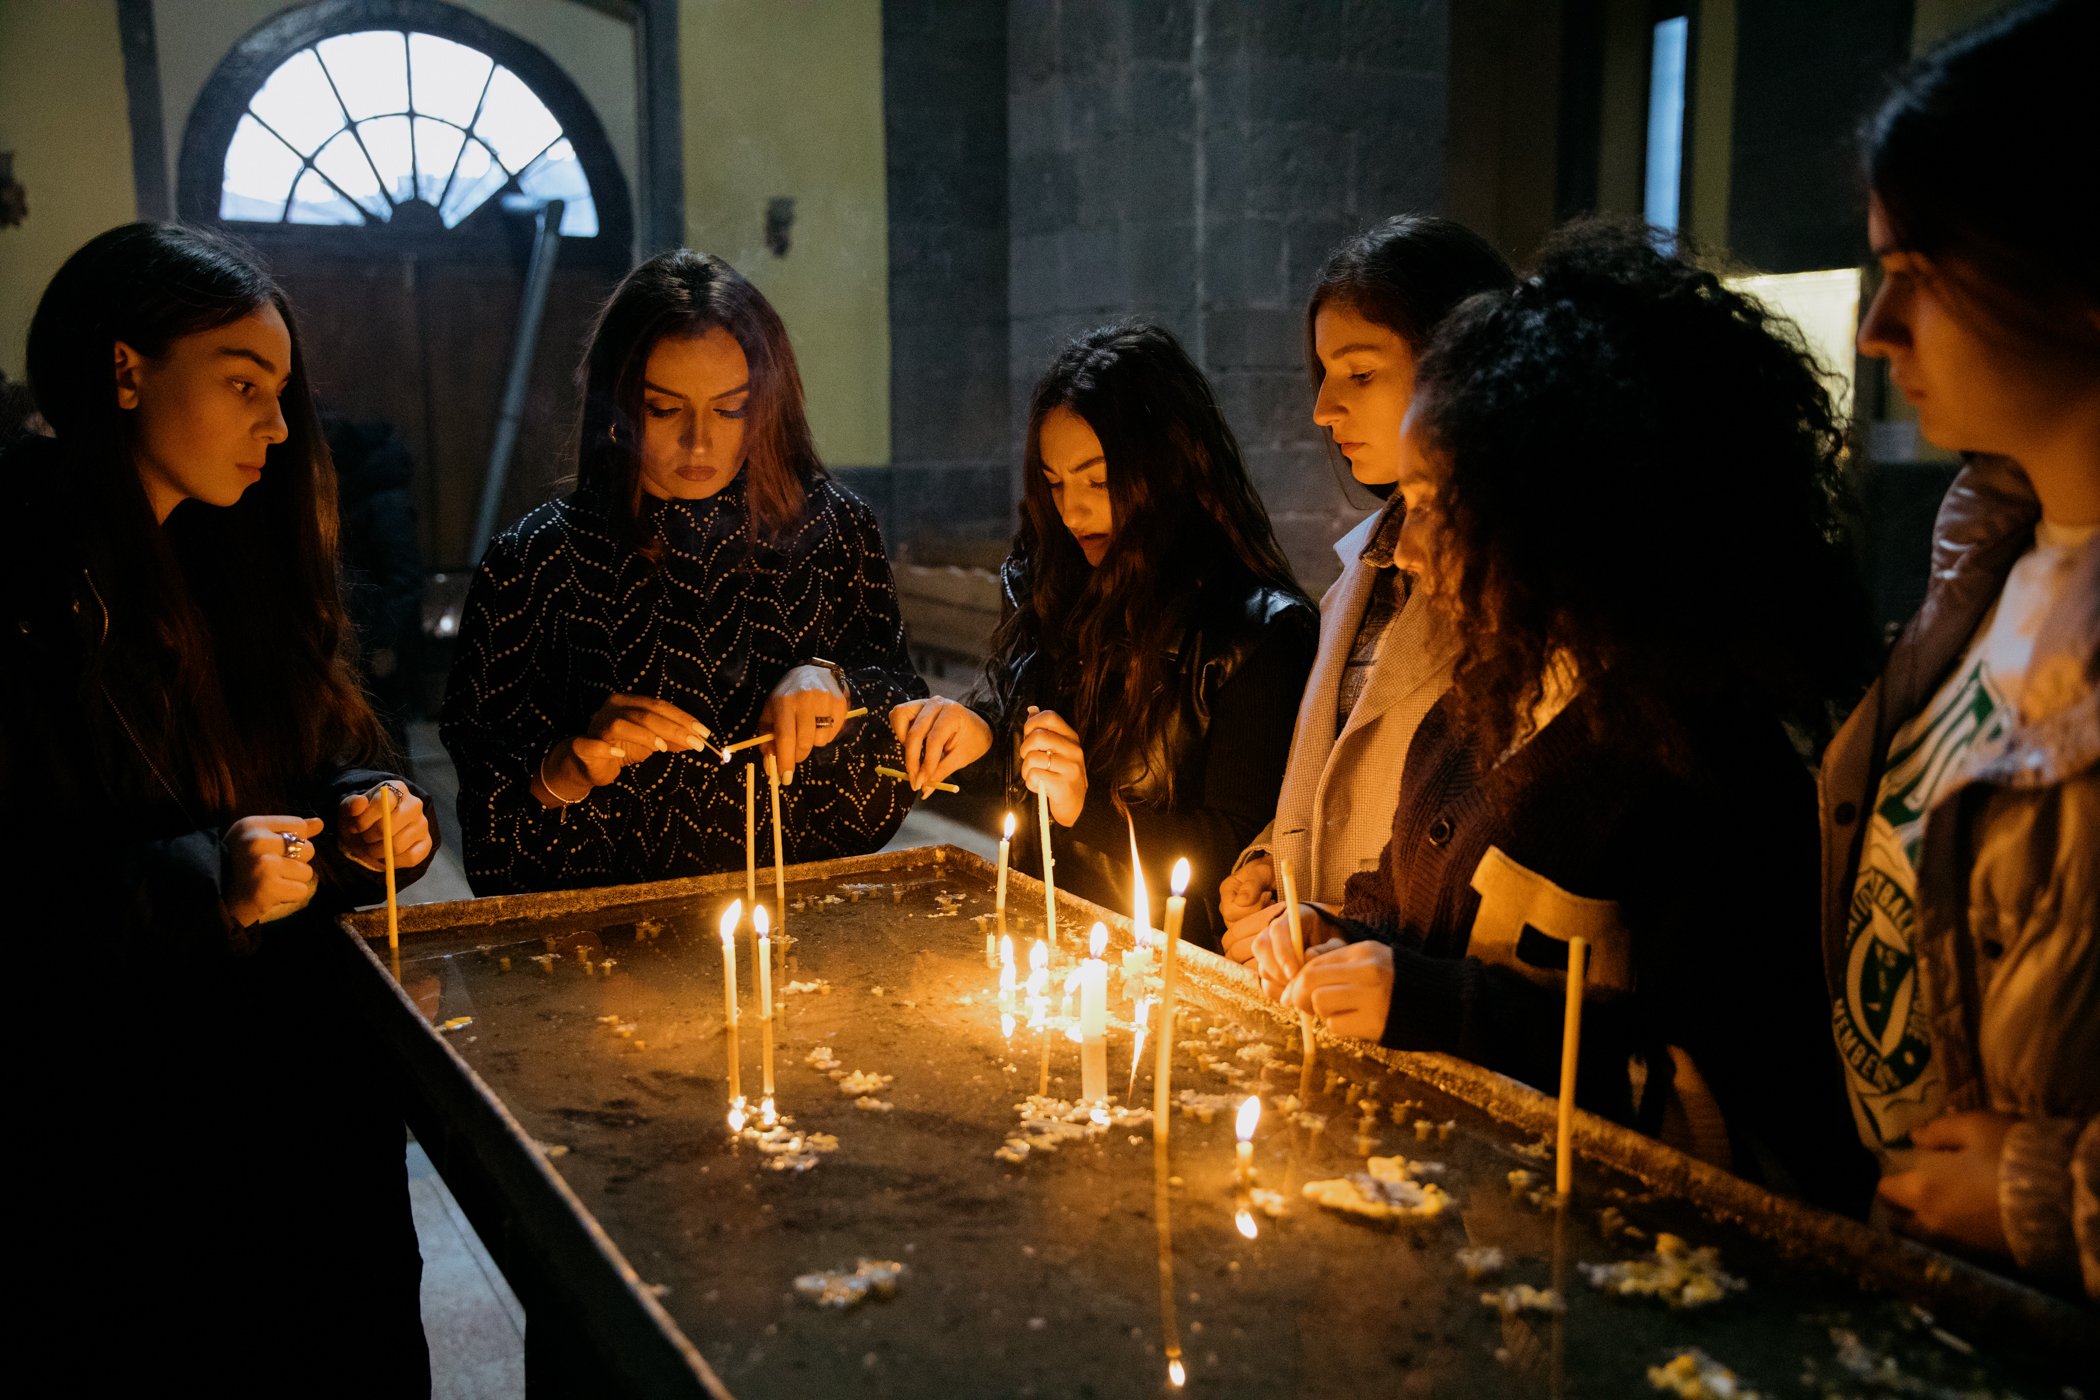  Members of the Asparez dance group from Stepanakert light candles in a church in Goris. They were taking part in a competition in Tbilisi before the blockade separated them from their families. 